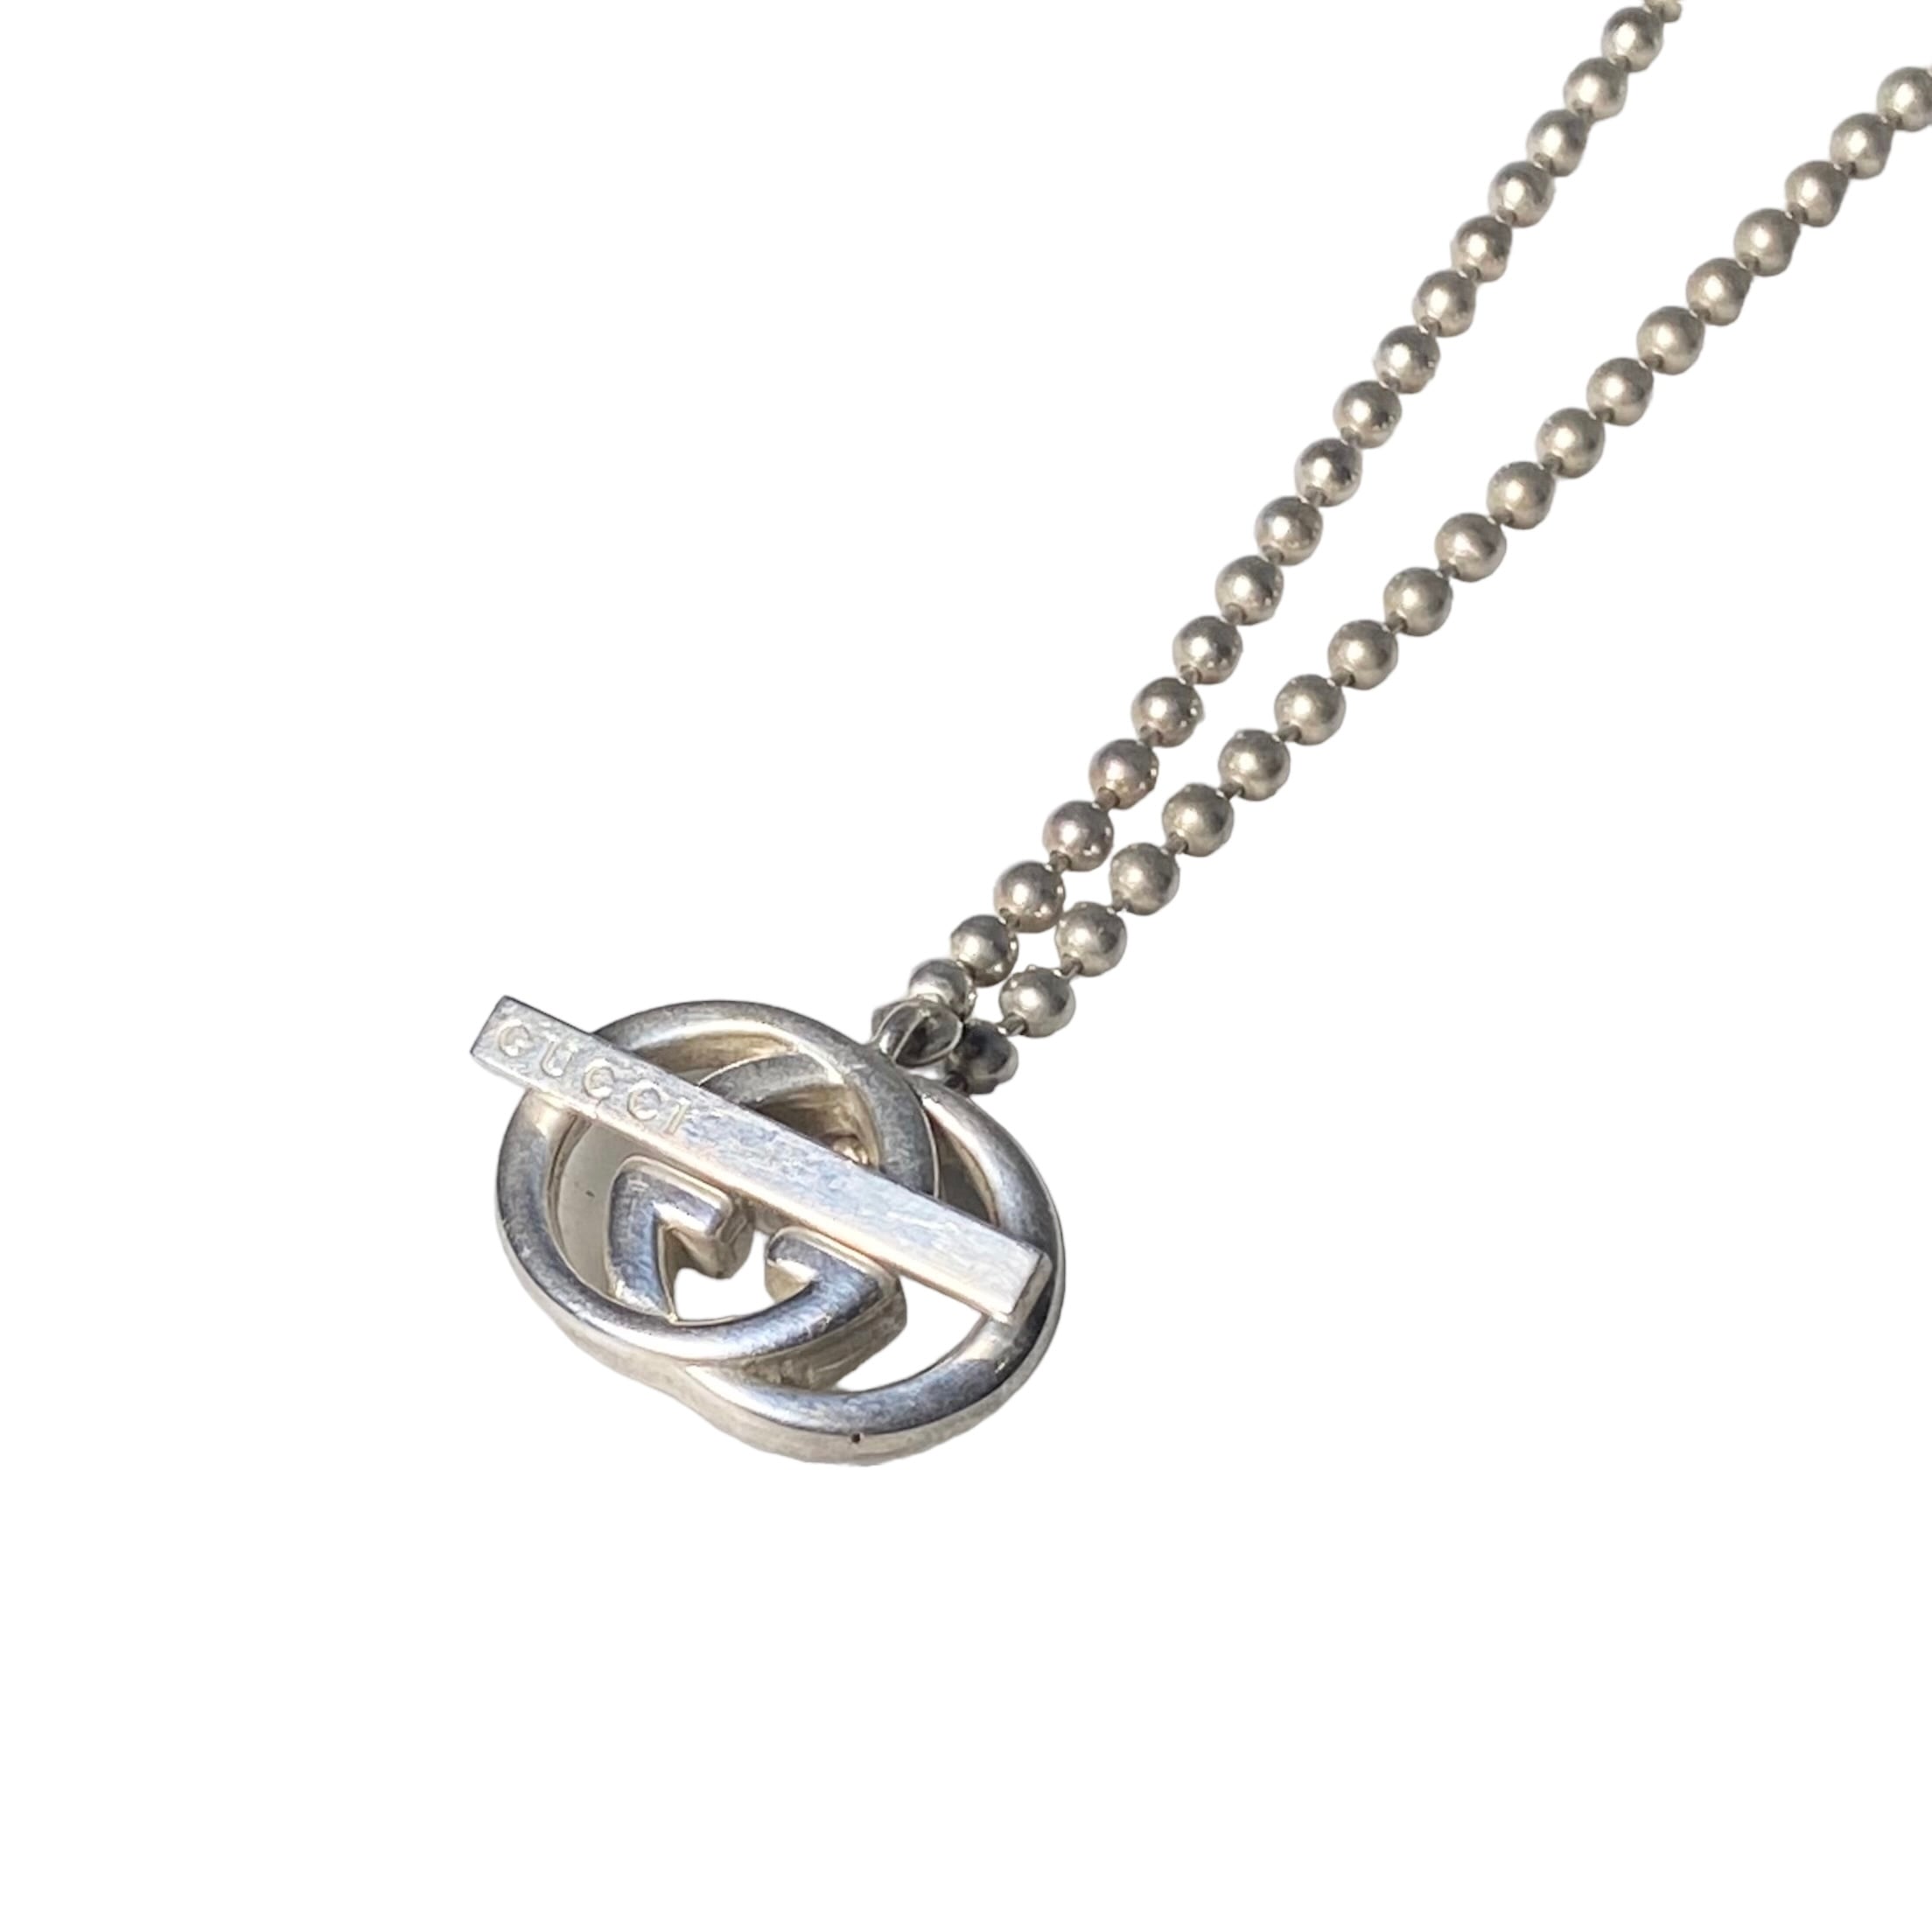 GUCCI silver ball chain toggle necklace “interlocking G” | NOIR ONLINE